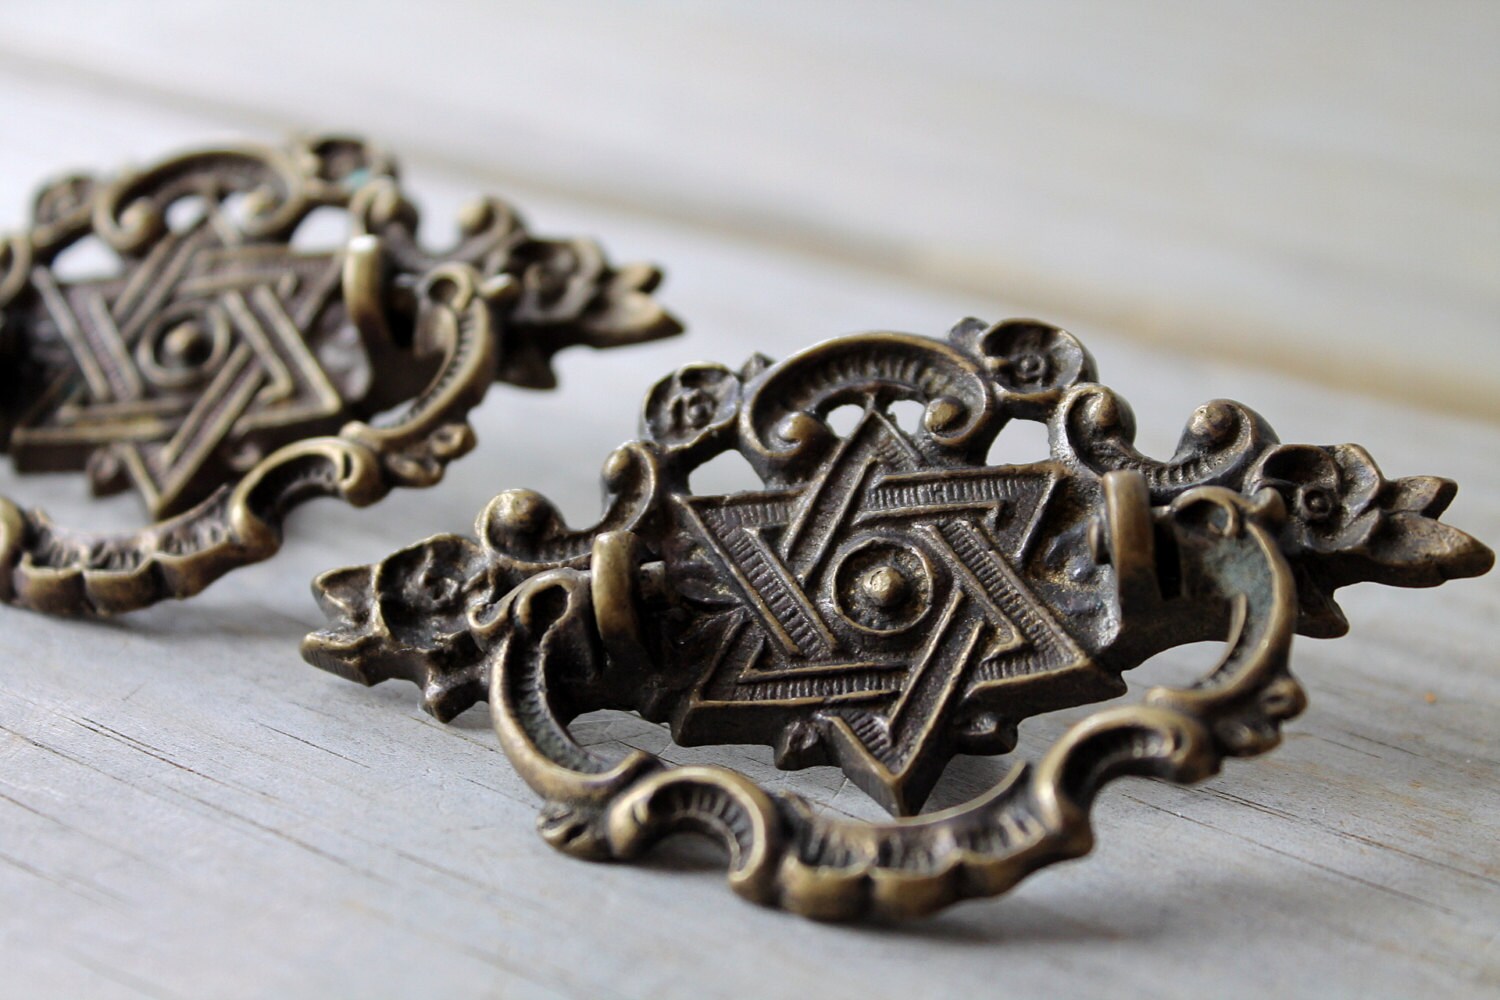 Vintage brass drawer pulls / Victorian style / by WhiteDogVintage